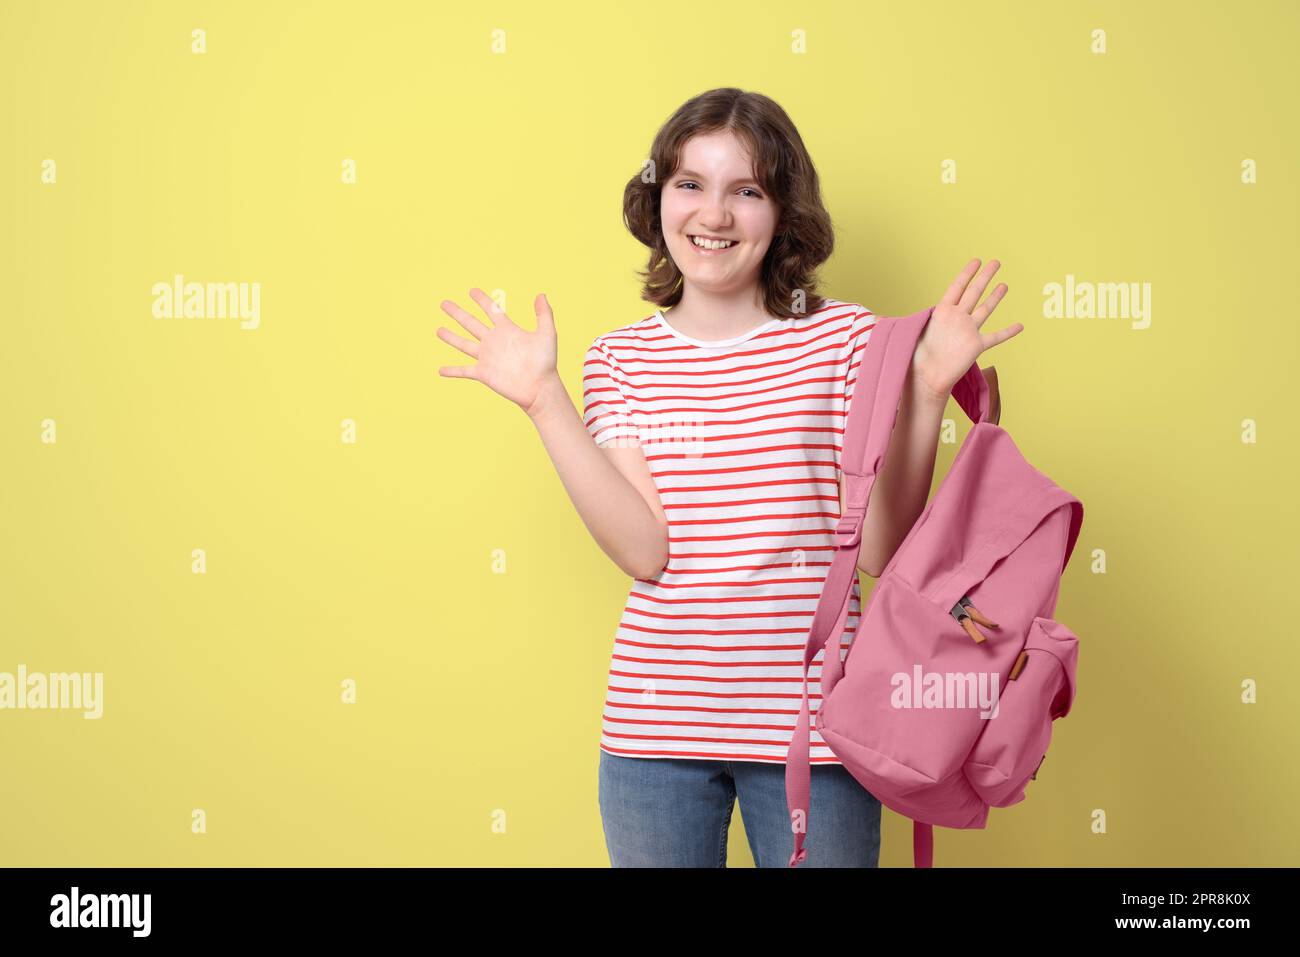 Happy schoolgirl smiling and holding backpack, looking at camera, on yellow background Stock Photo